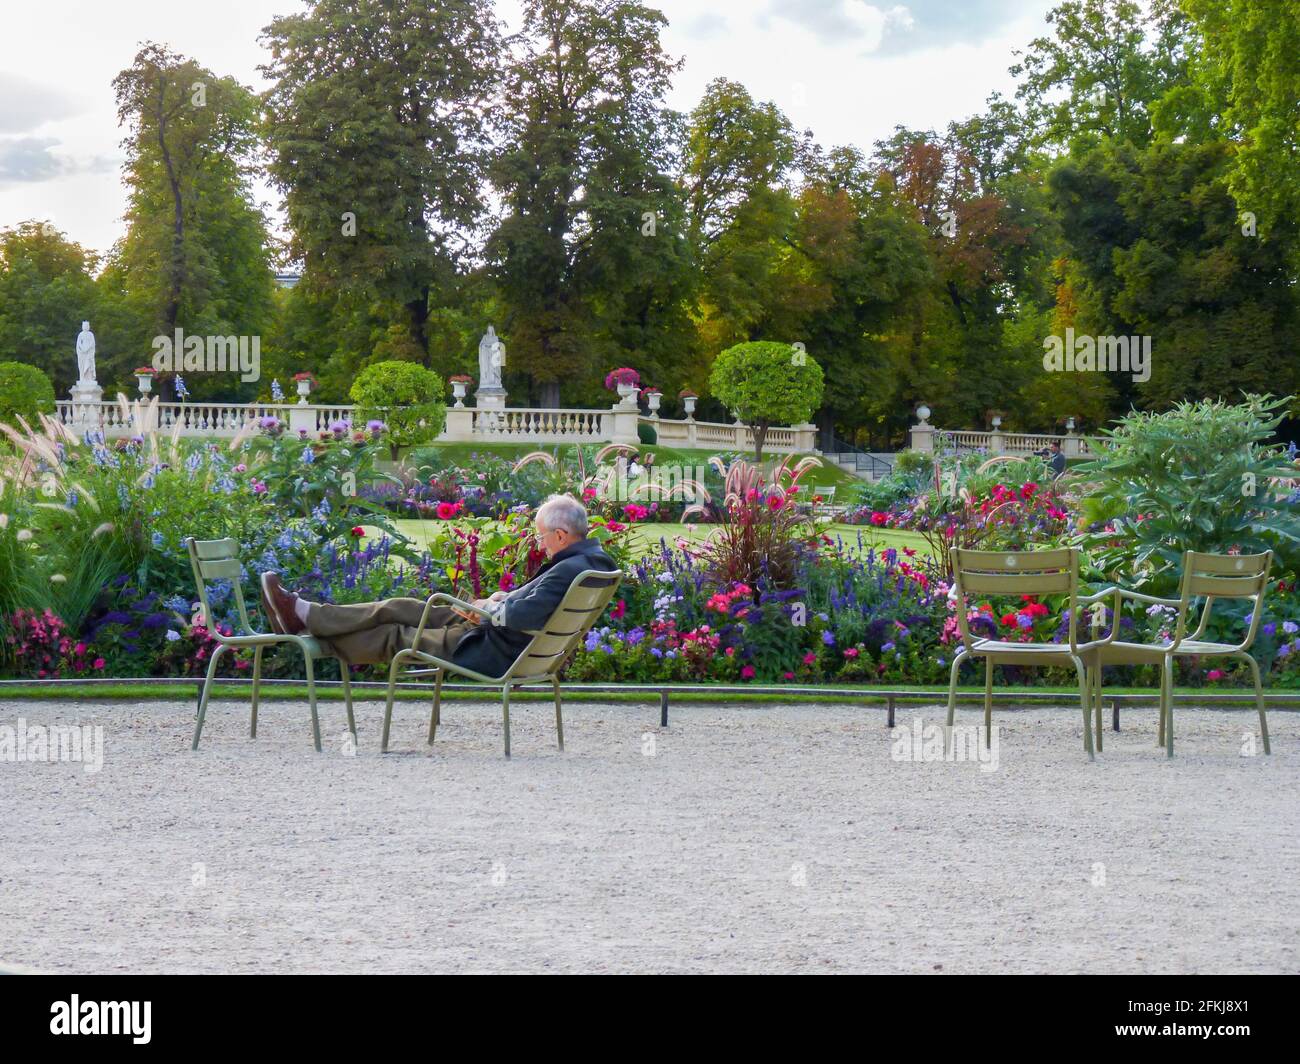 A person having rest on two typical green chairs in Luxembourg Garden, Paris next to flowers in blossom. Stock Photo